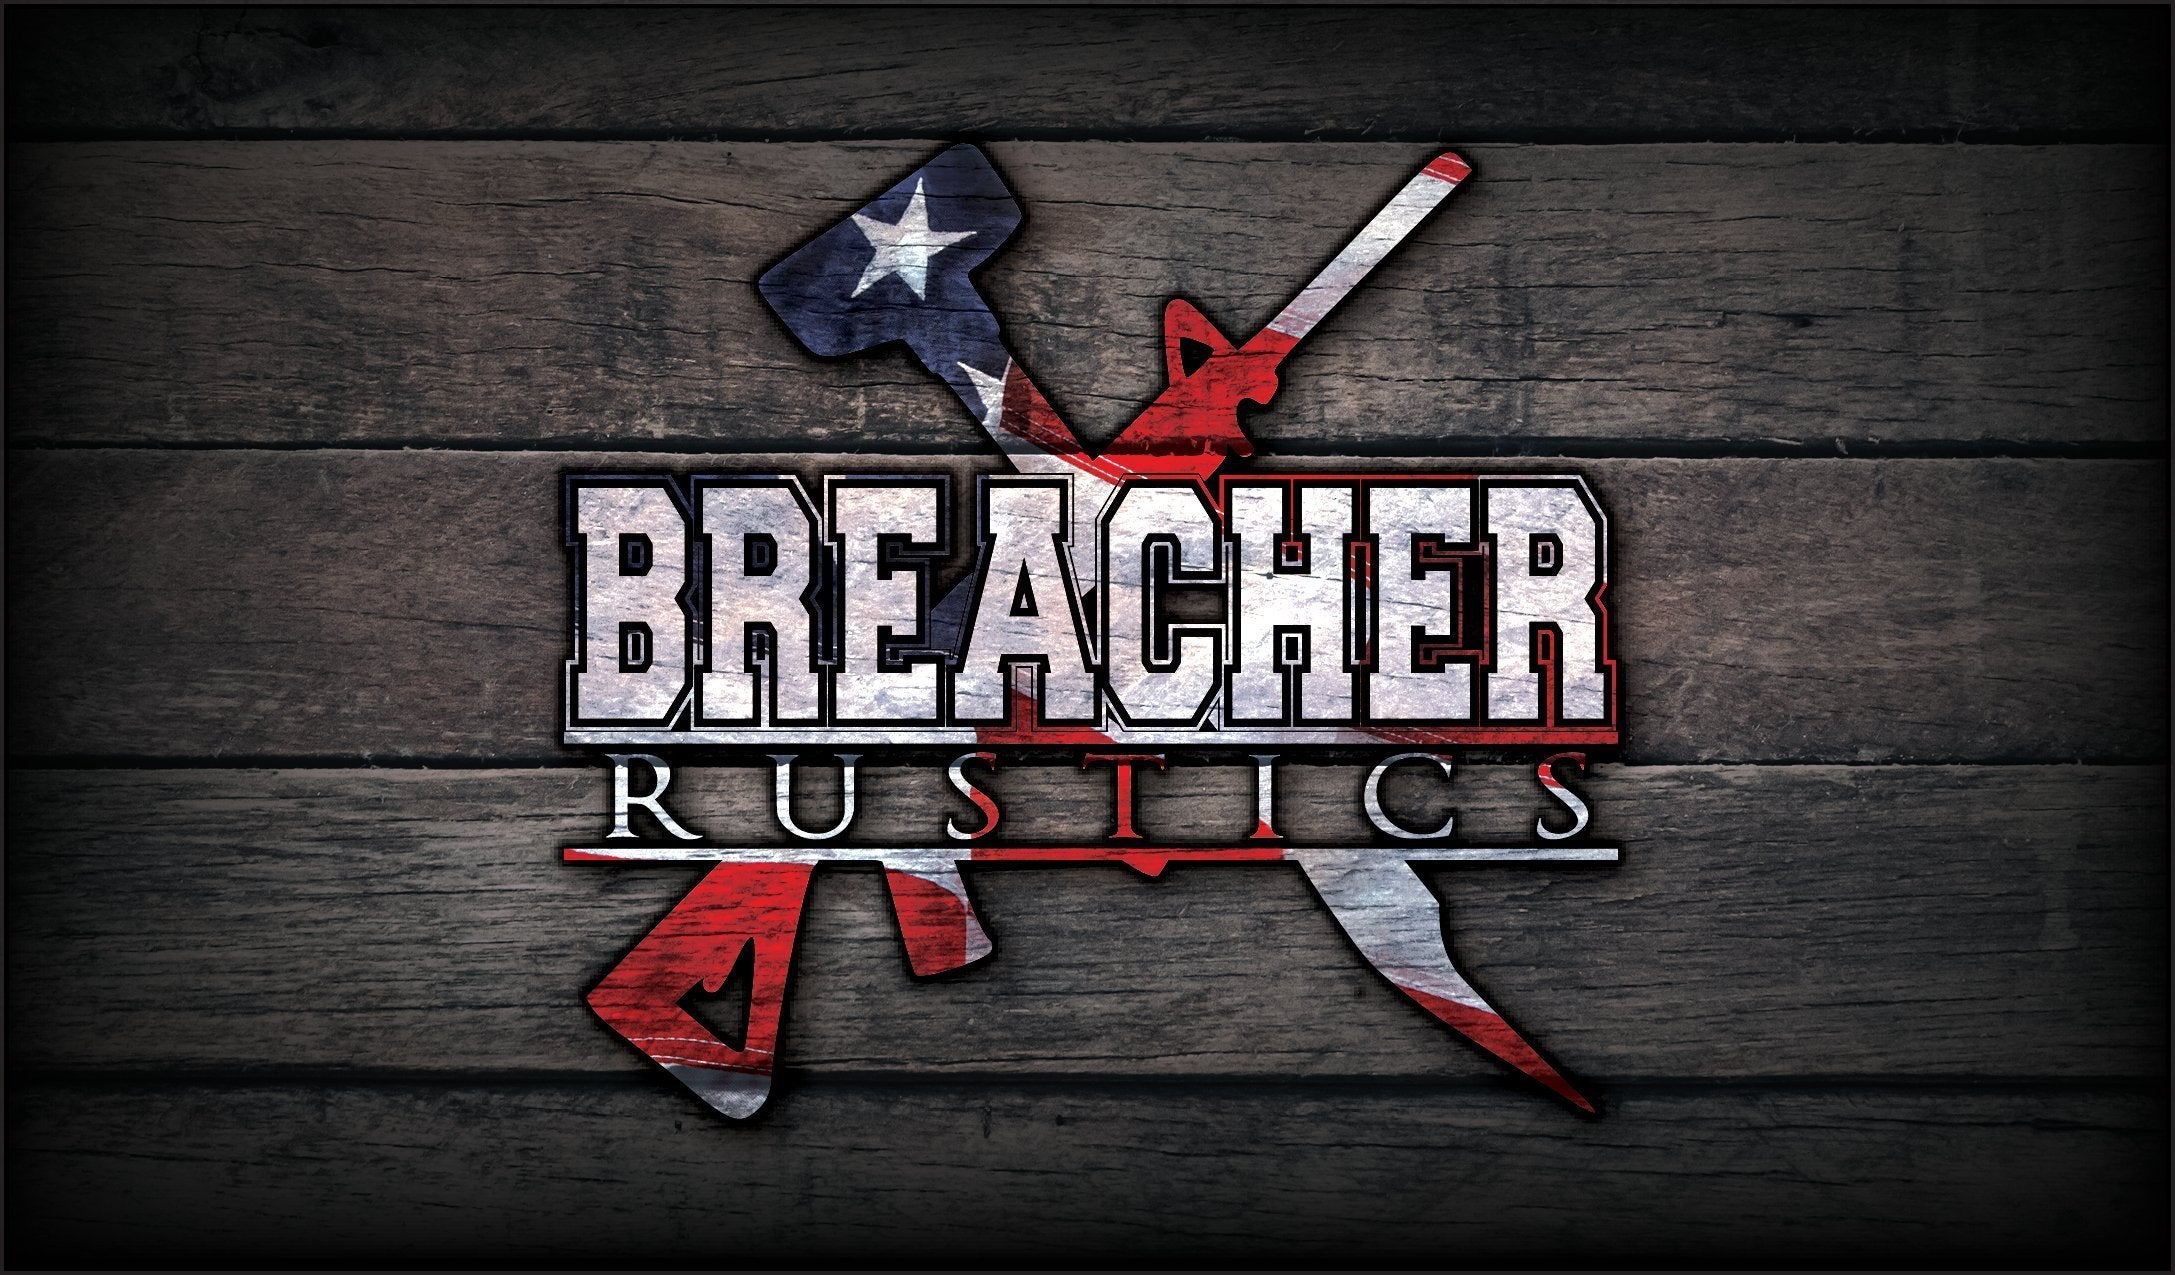 Breacher Rustics- Stand For Something ™